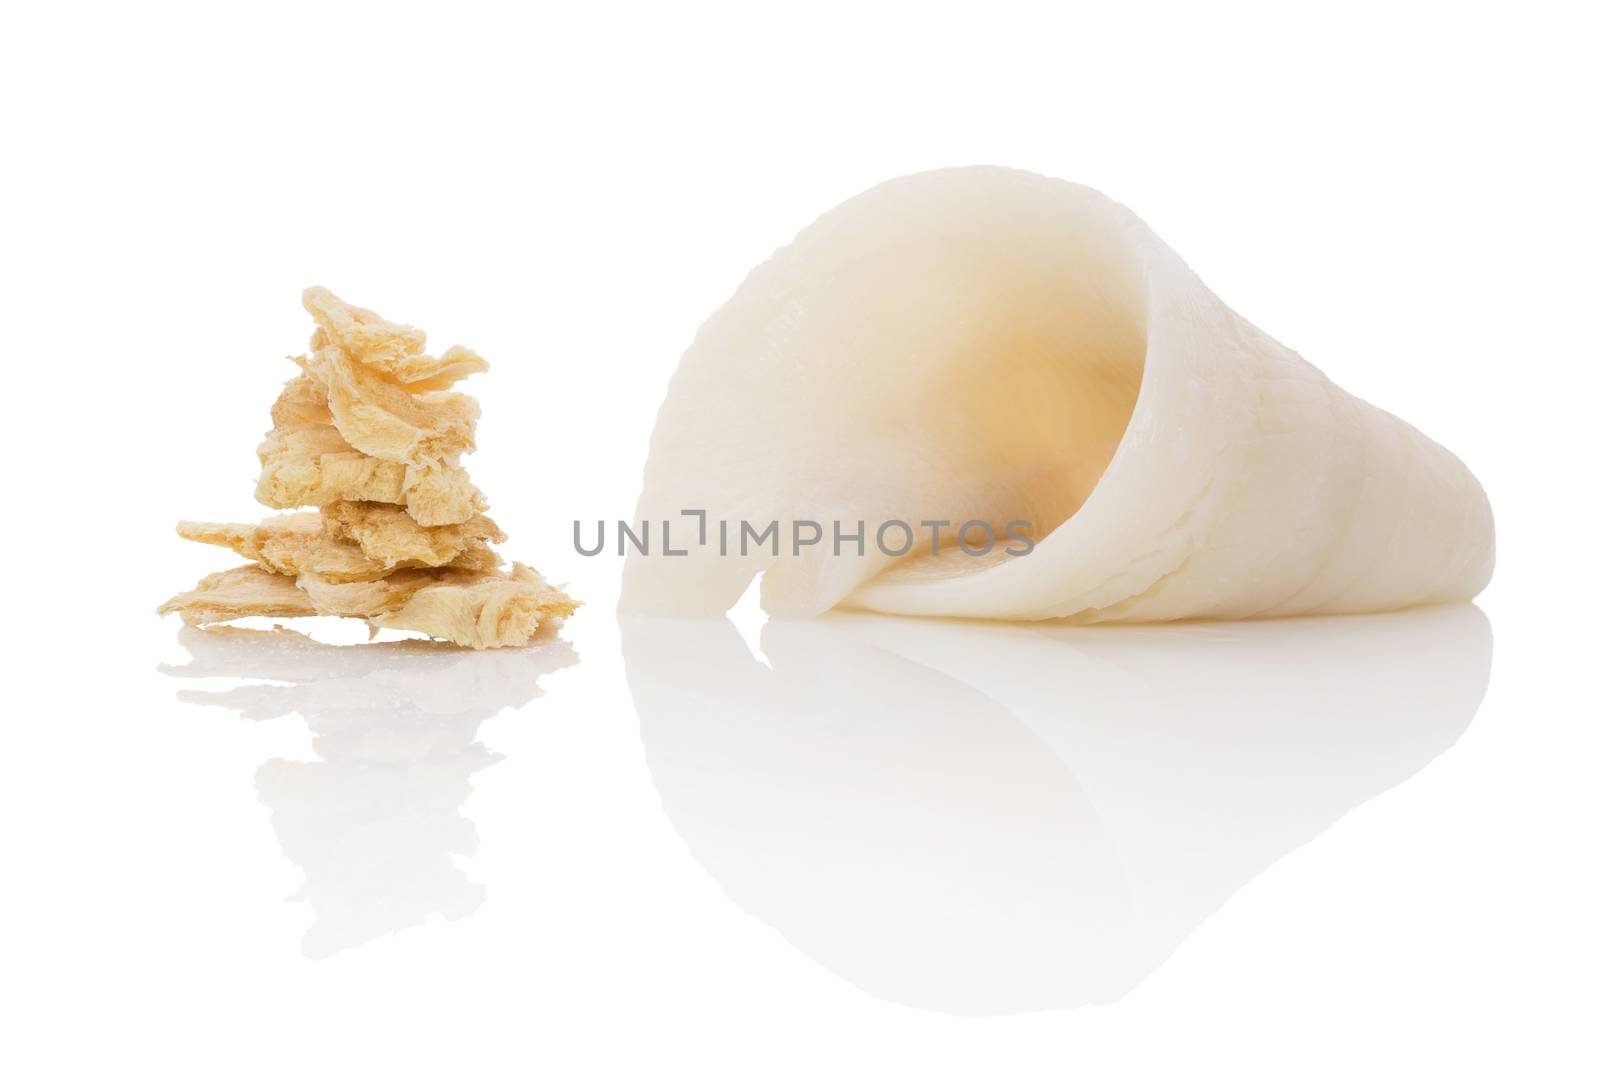 Fresh halibut fillet and dry fish snack isolated on white background. Culinary seafood eating. 